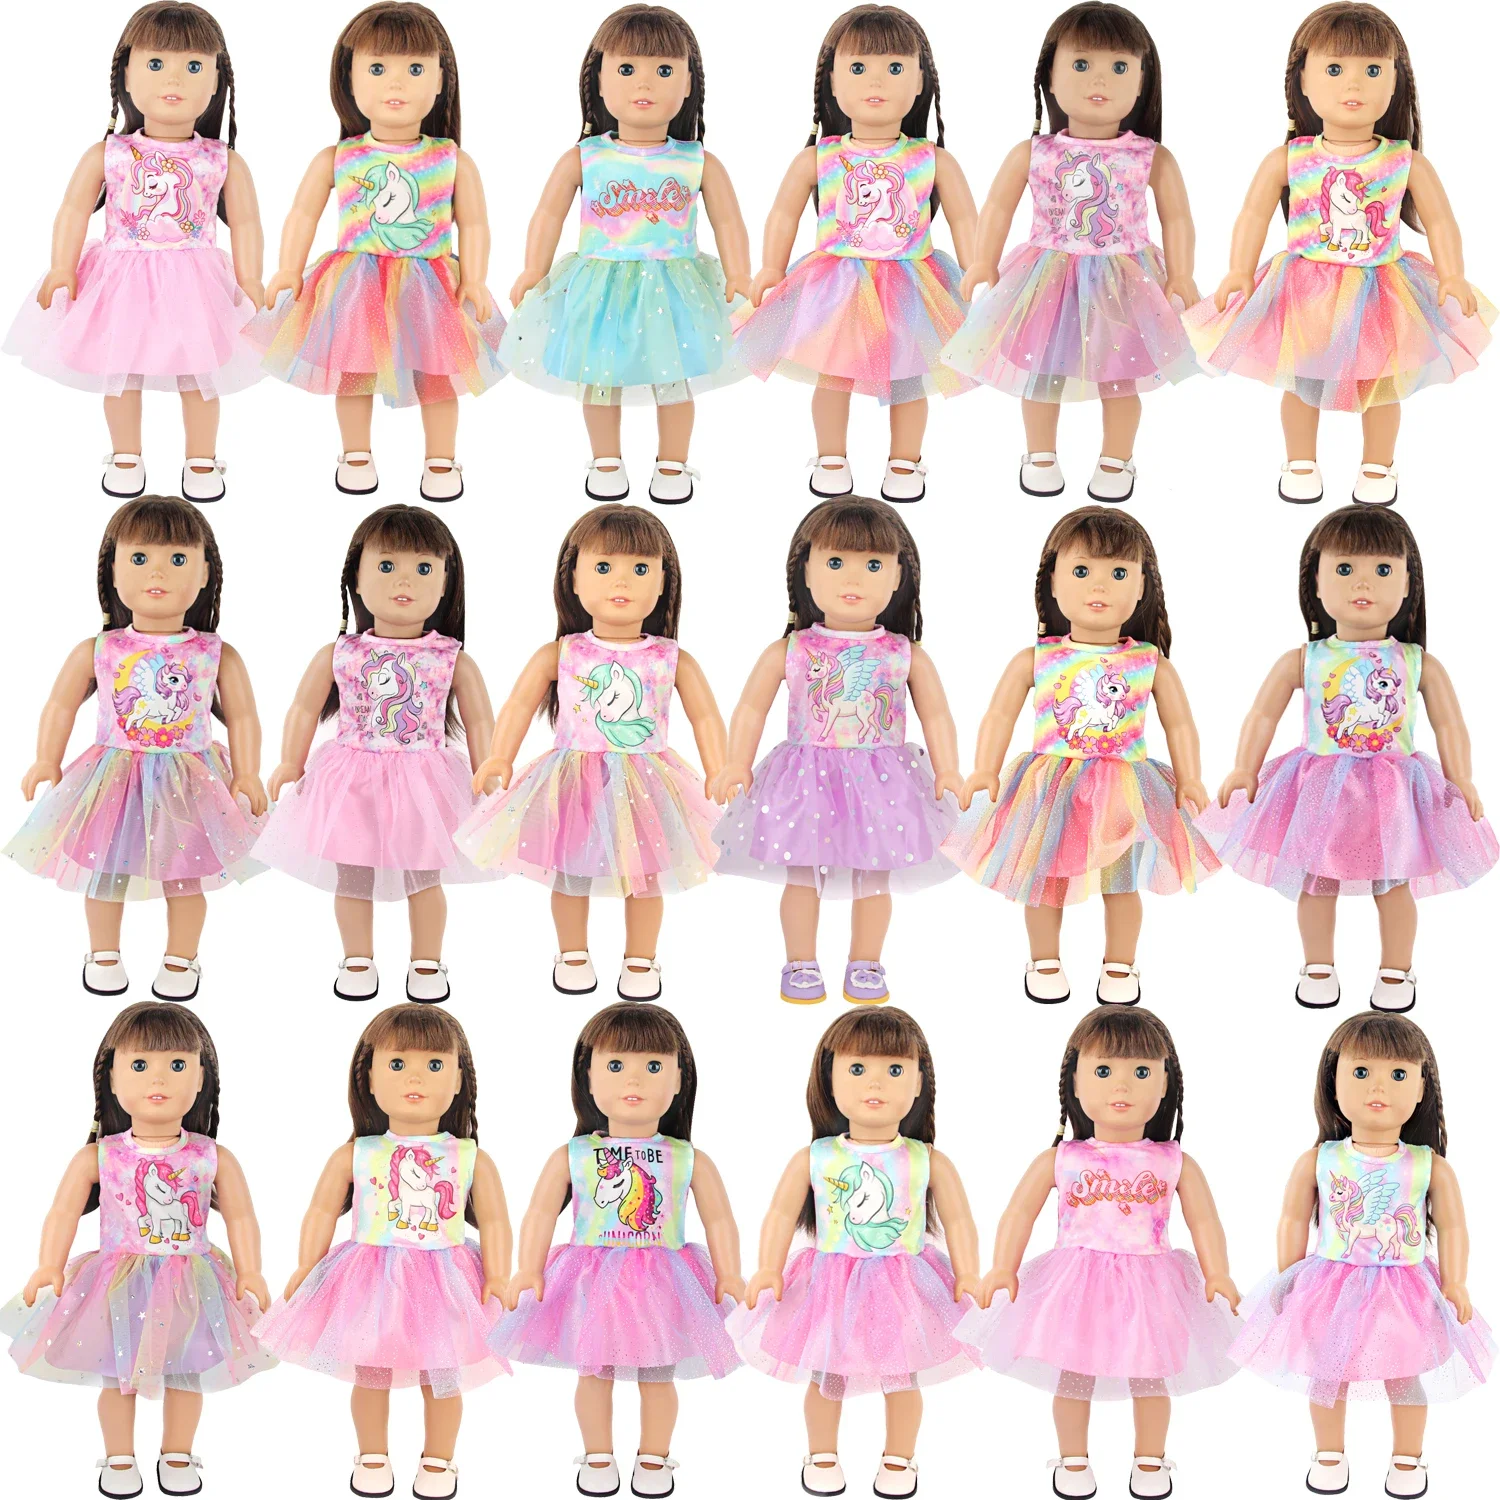 

Lovely Double Layered Unicorn Dress Clothes For American 18 Inch Baby Girl Doll Smile Skirts For 43cm Baby New Born Doll DIY Toy